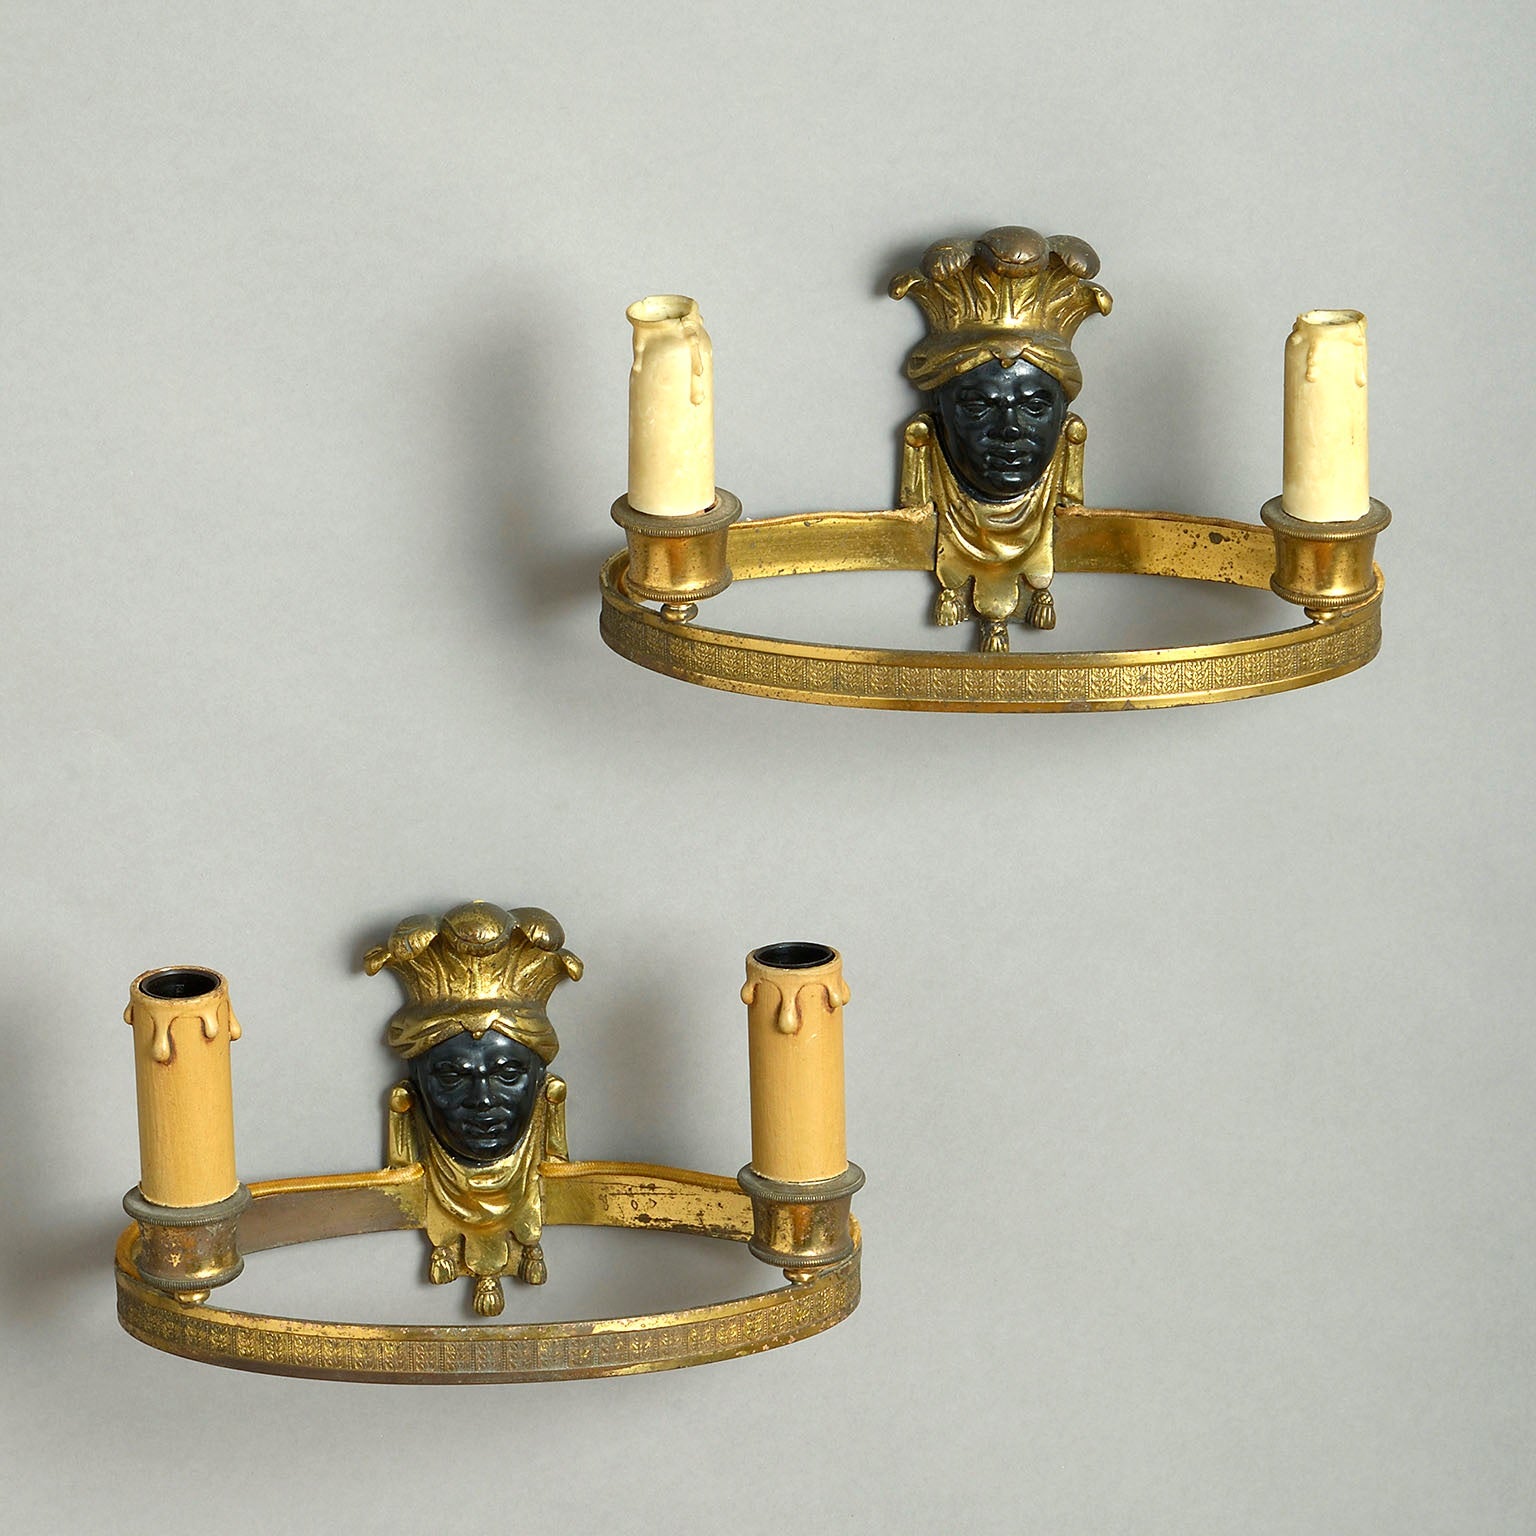 Pair of Empire Gilt-Bronze Wall Sconces with Bronzed Masks